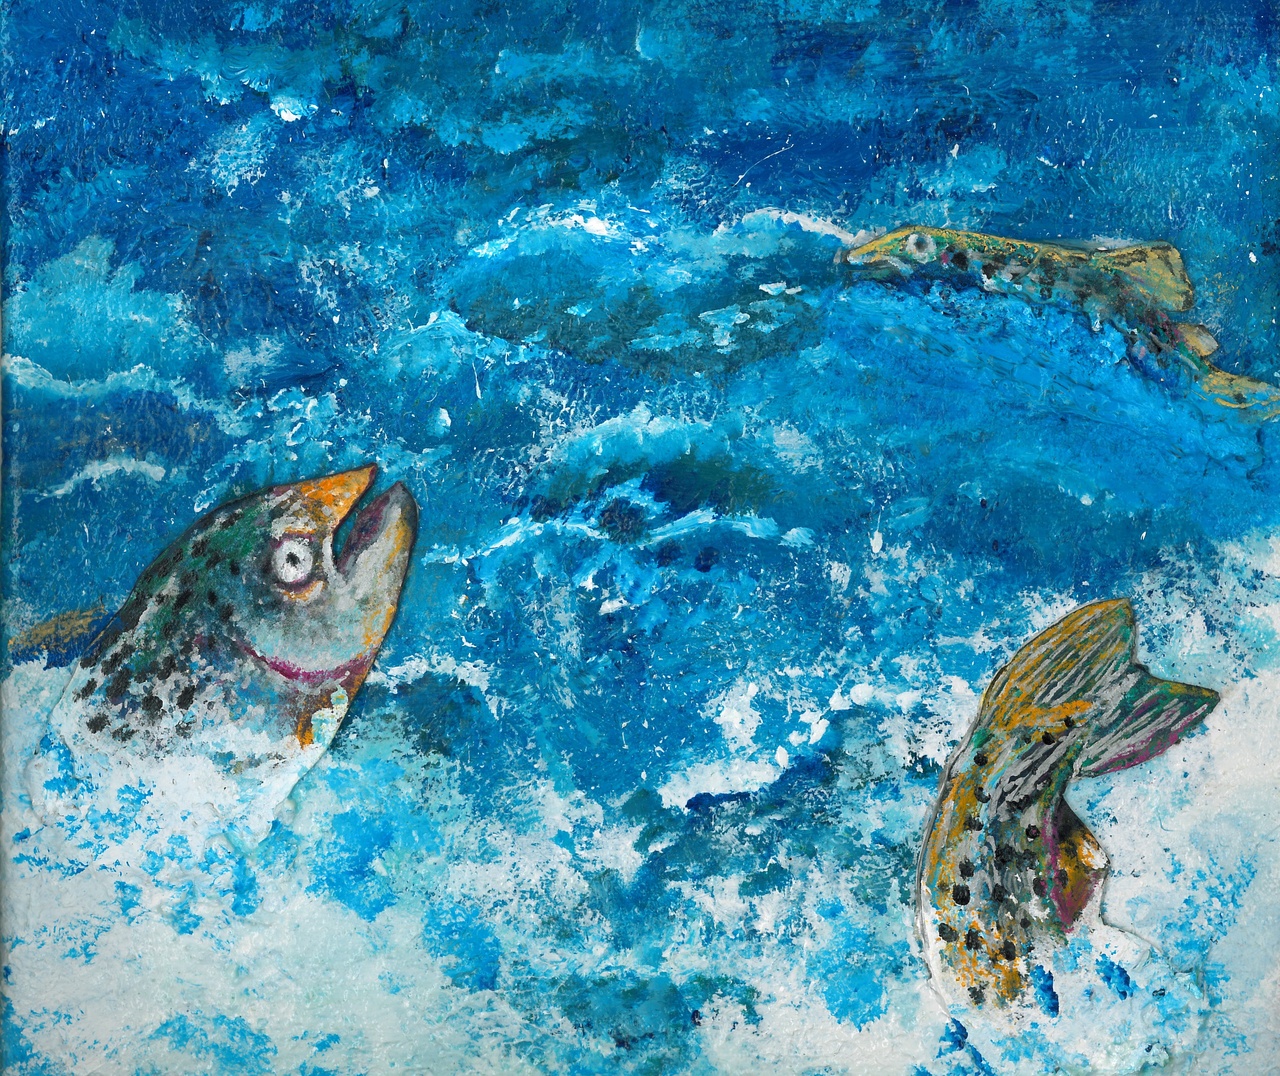 Art gallery: Browse the 2019 award-winning student artwork inspired by the  ocean | National Oceanic and Atmospheric Administration